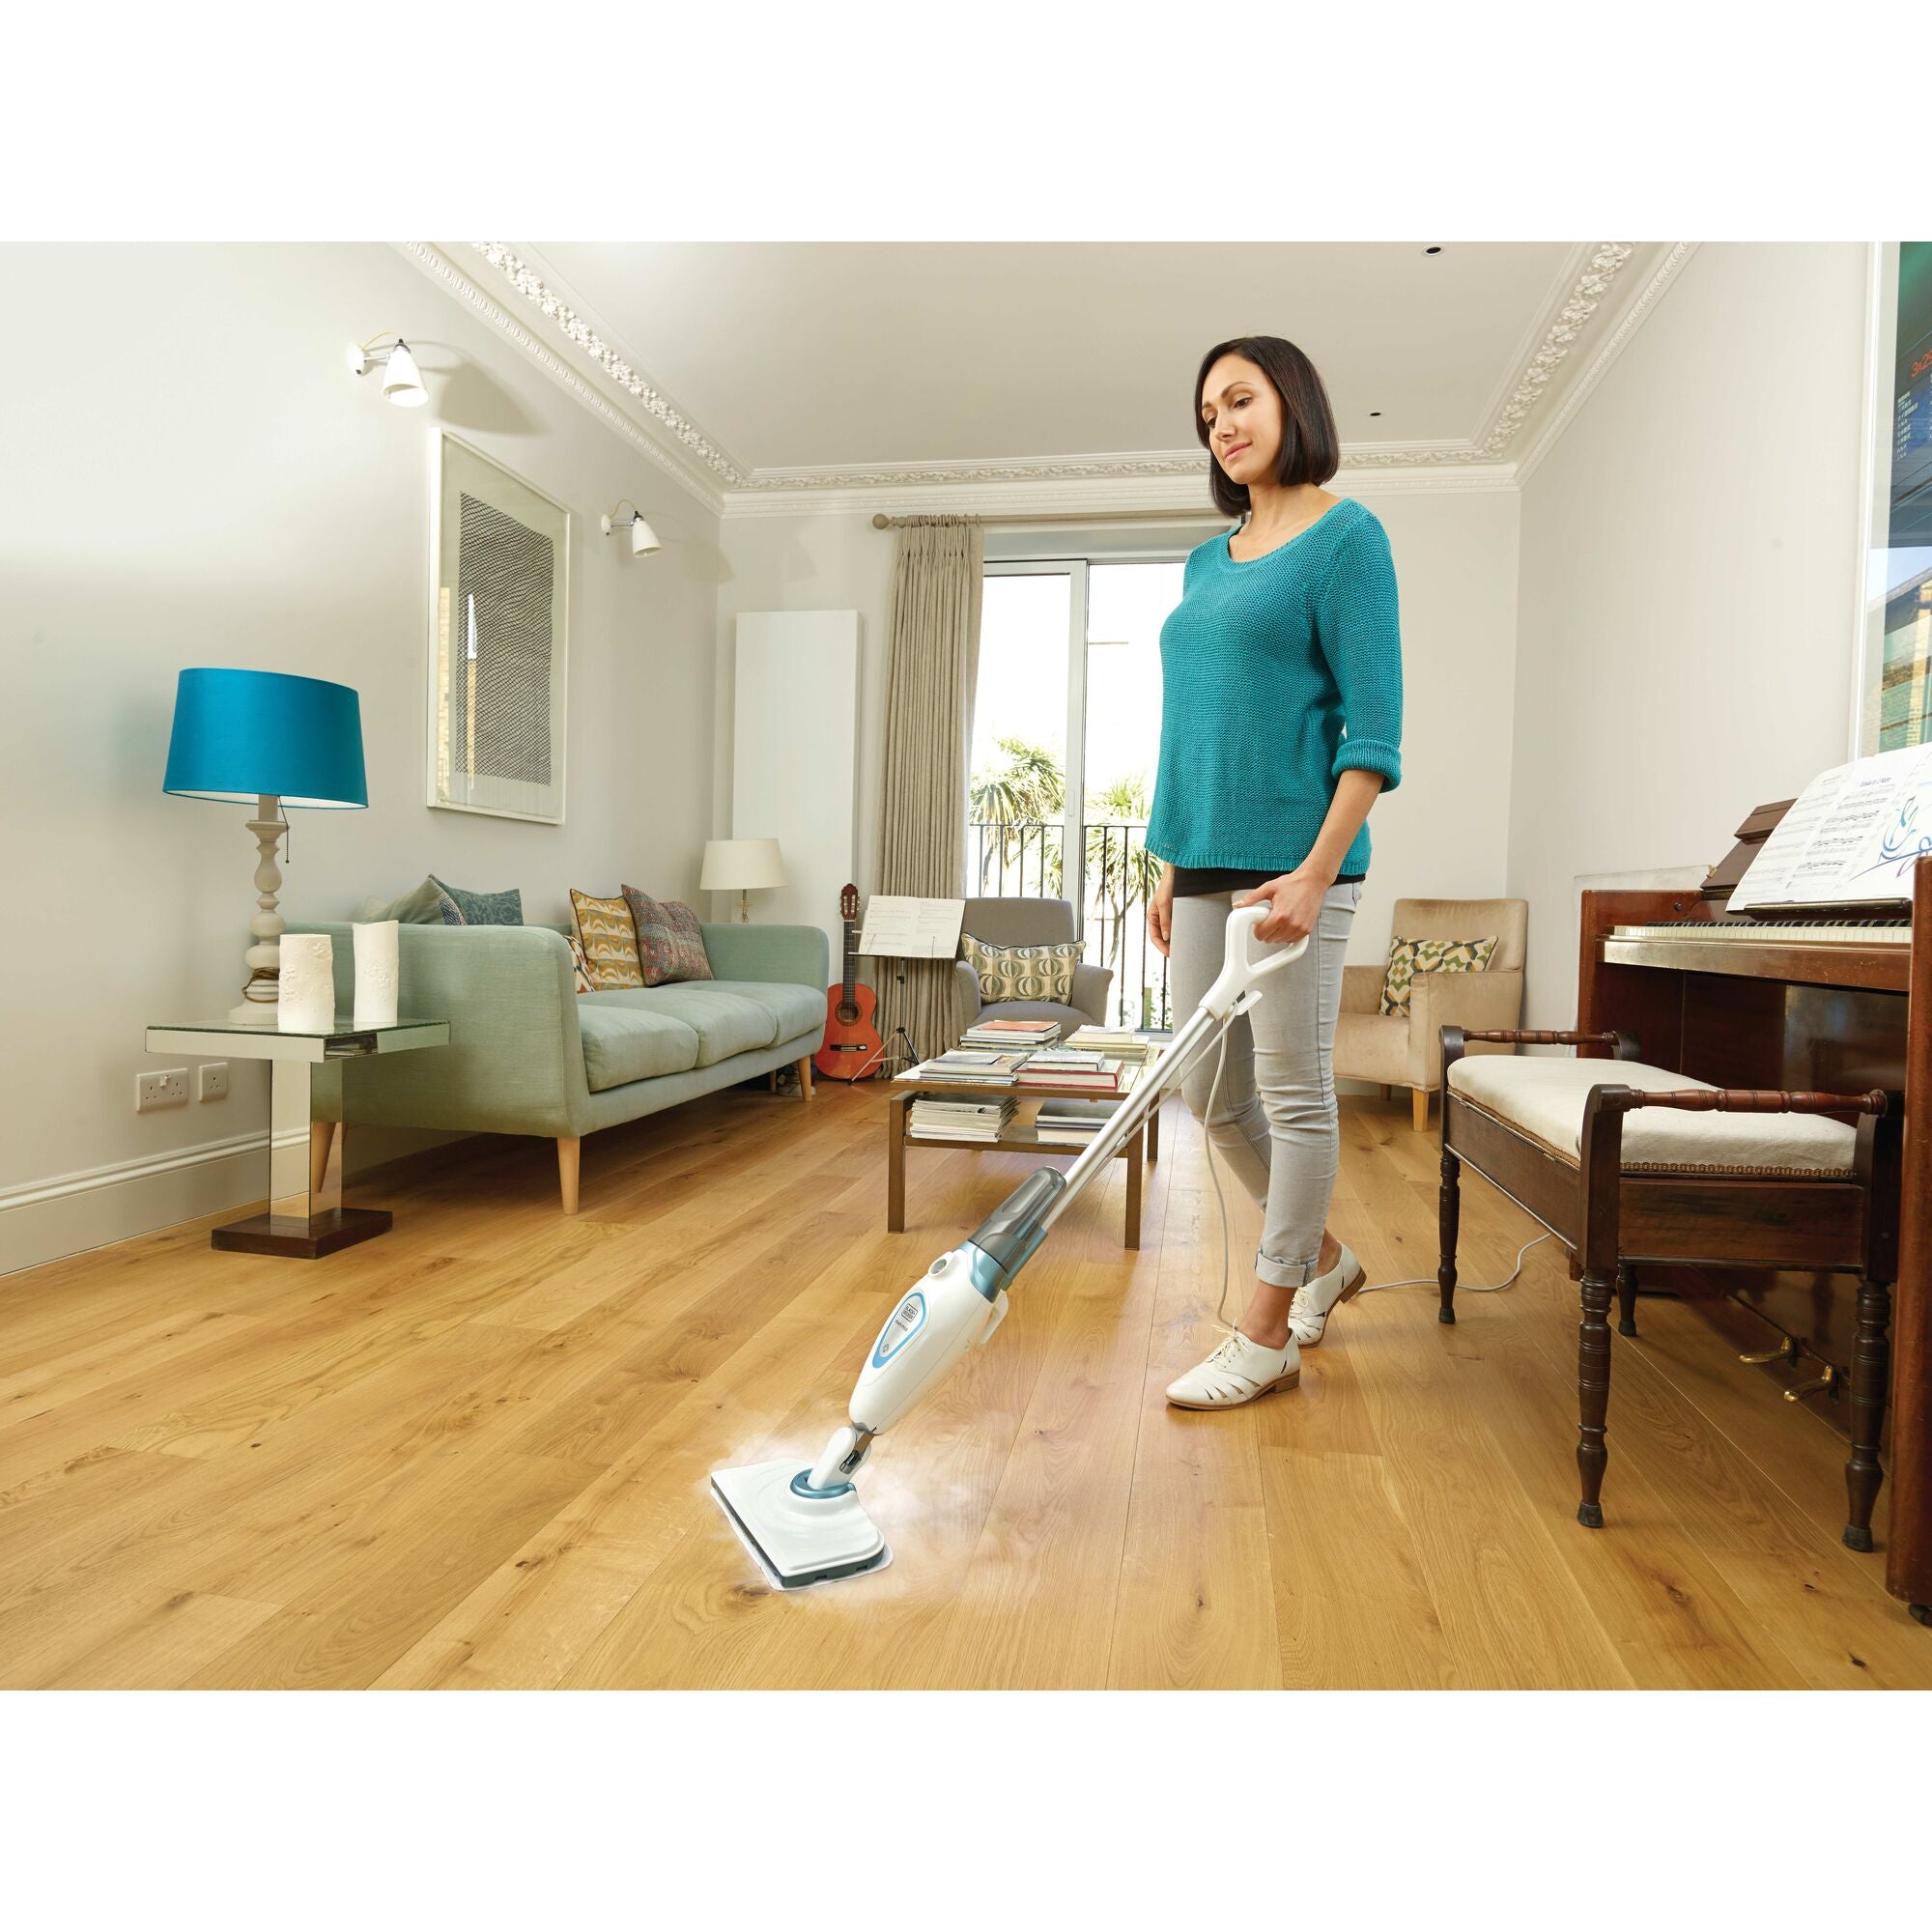 Steam Mop with Lift plus Reach Head being used to clean room floor.